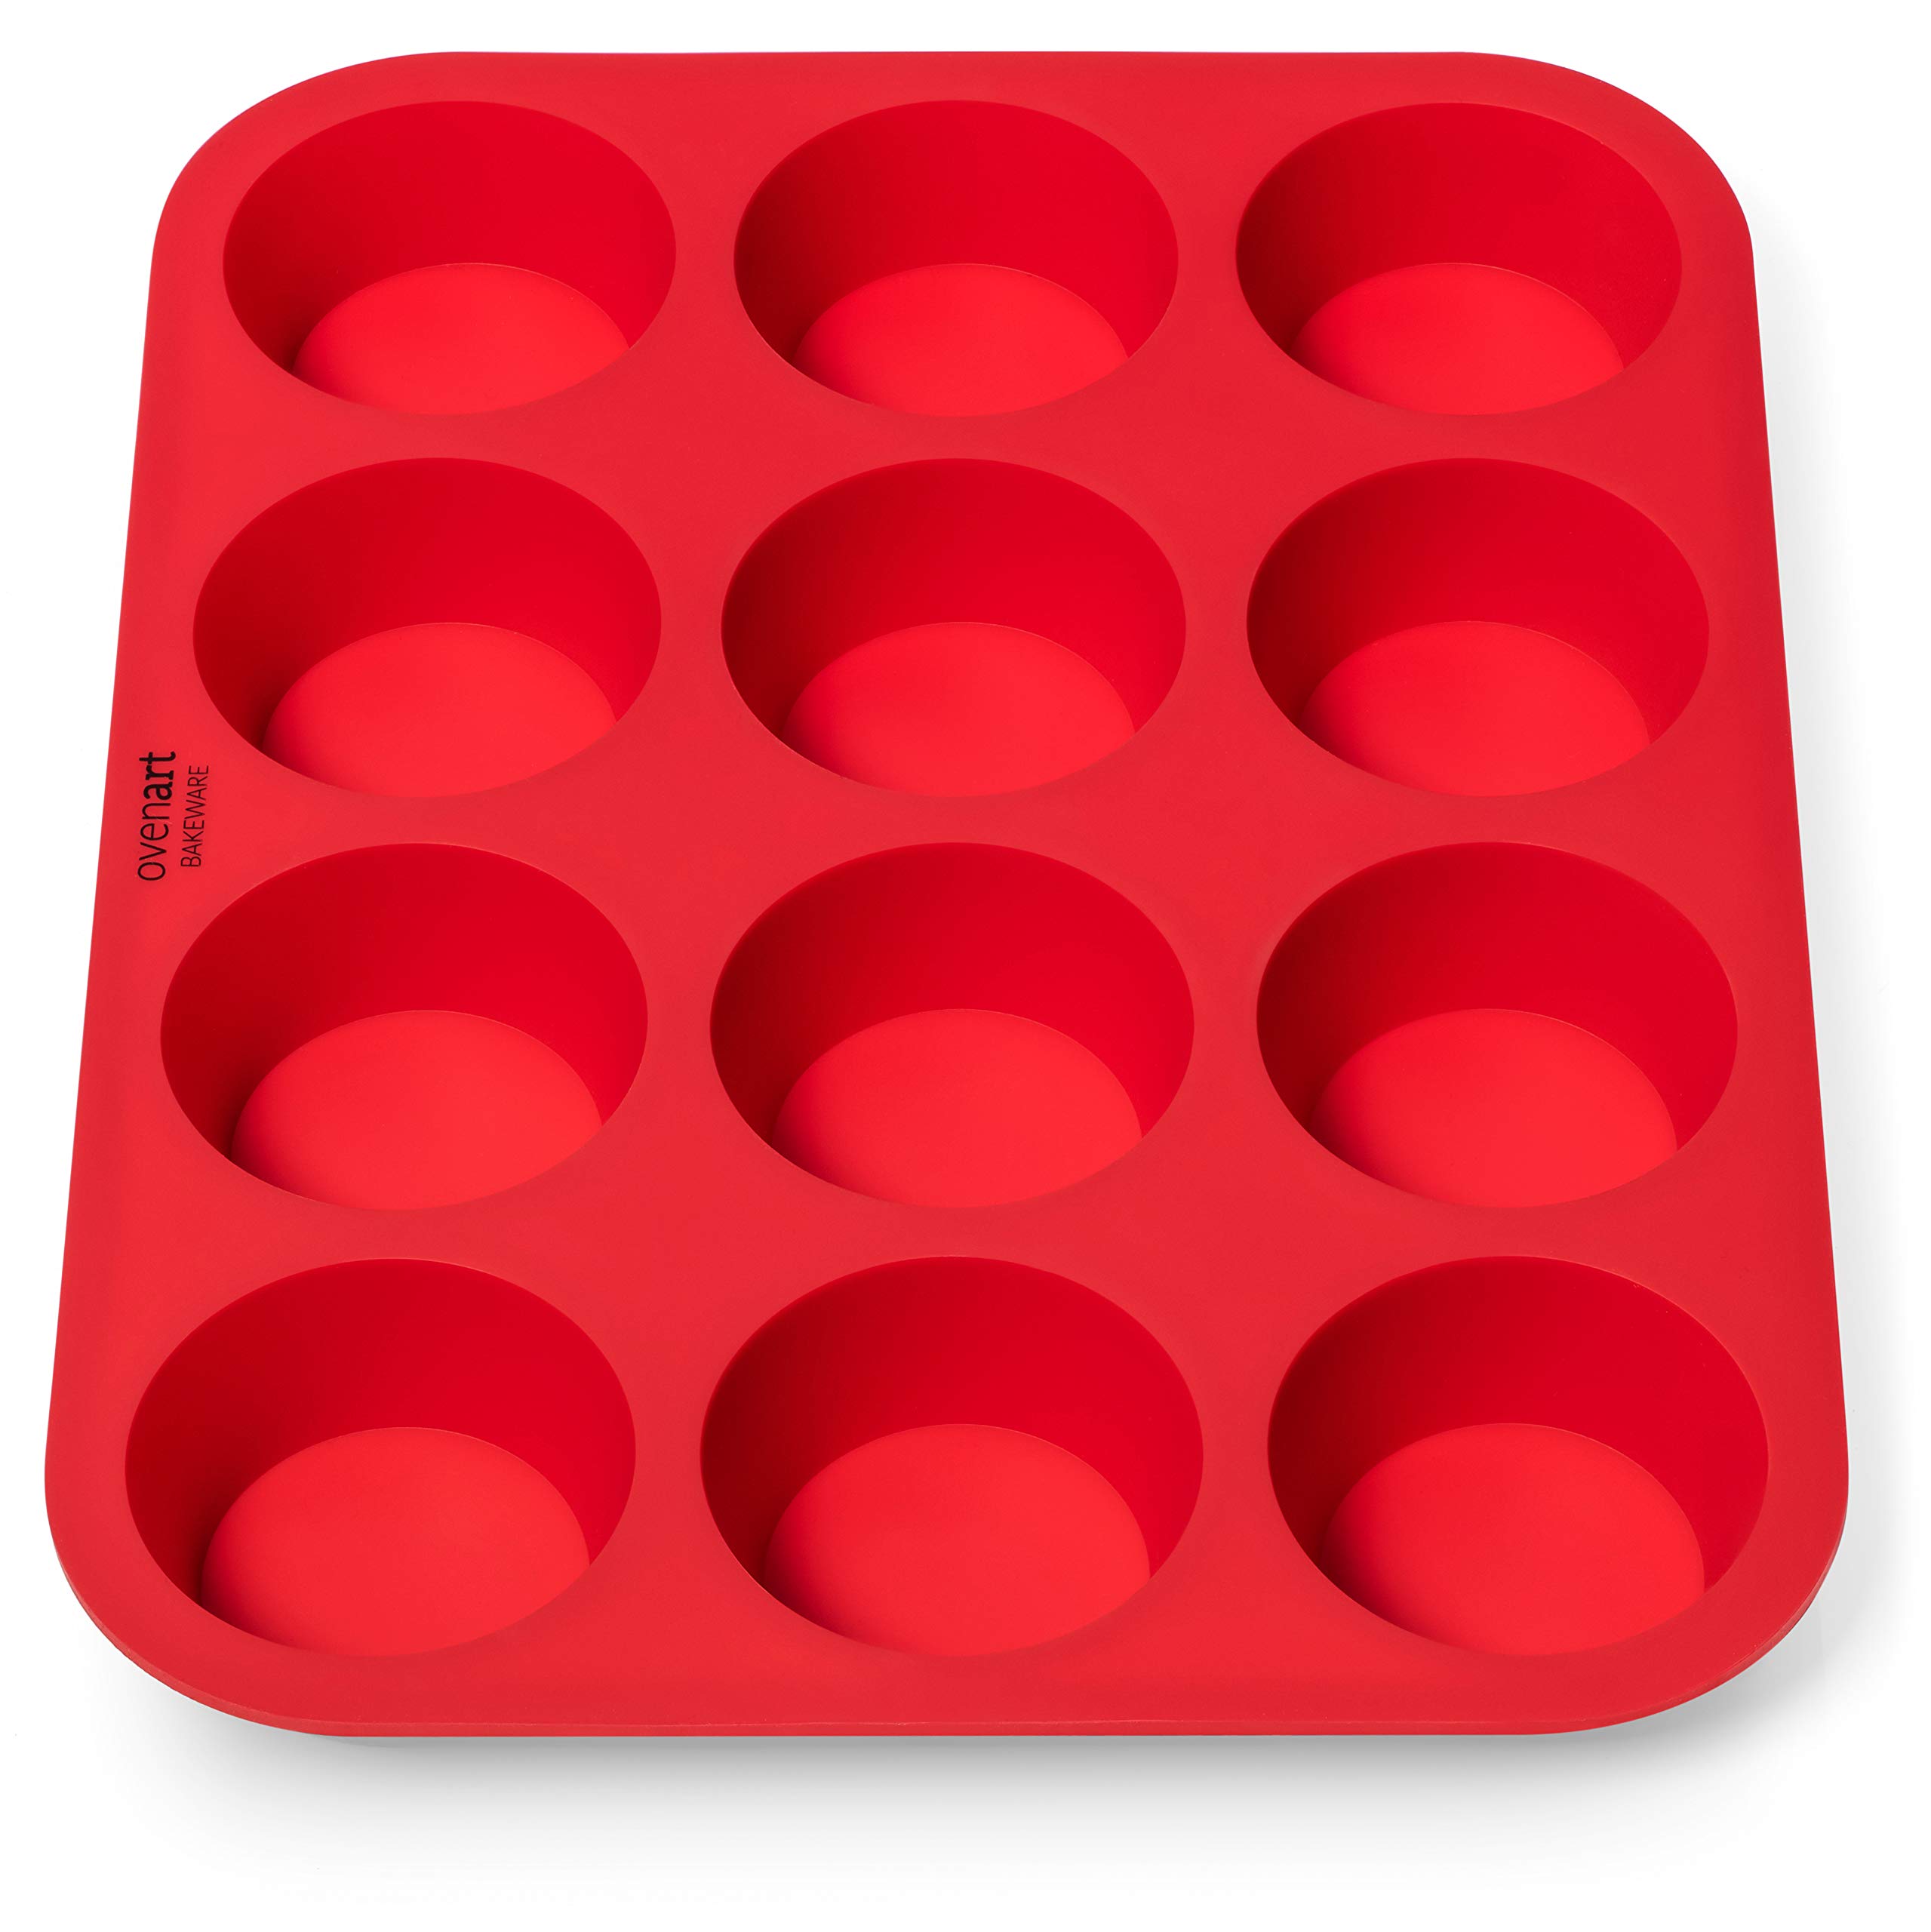 Buy OvenArt Bakeware Silicone Muffin Cupcake Pan (12-Cup) Online